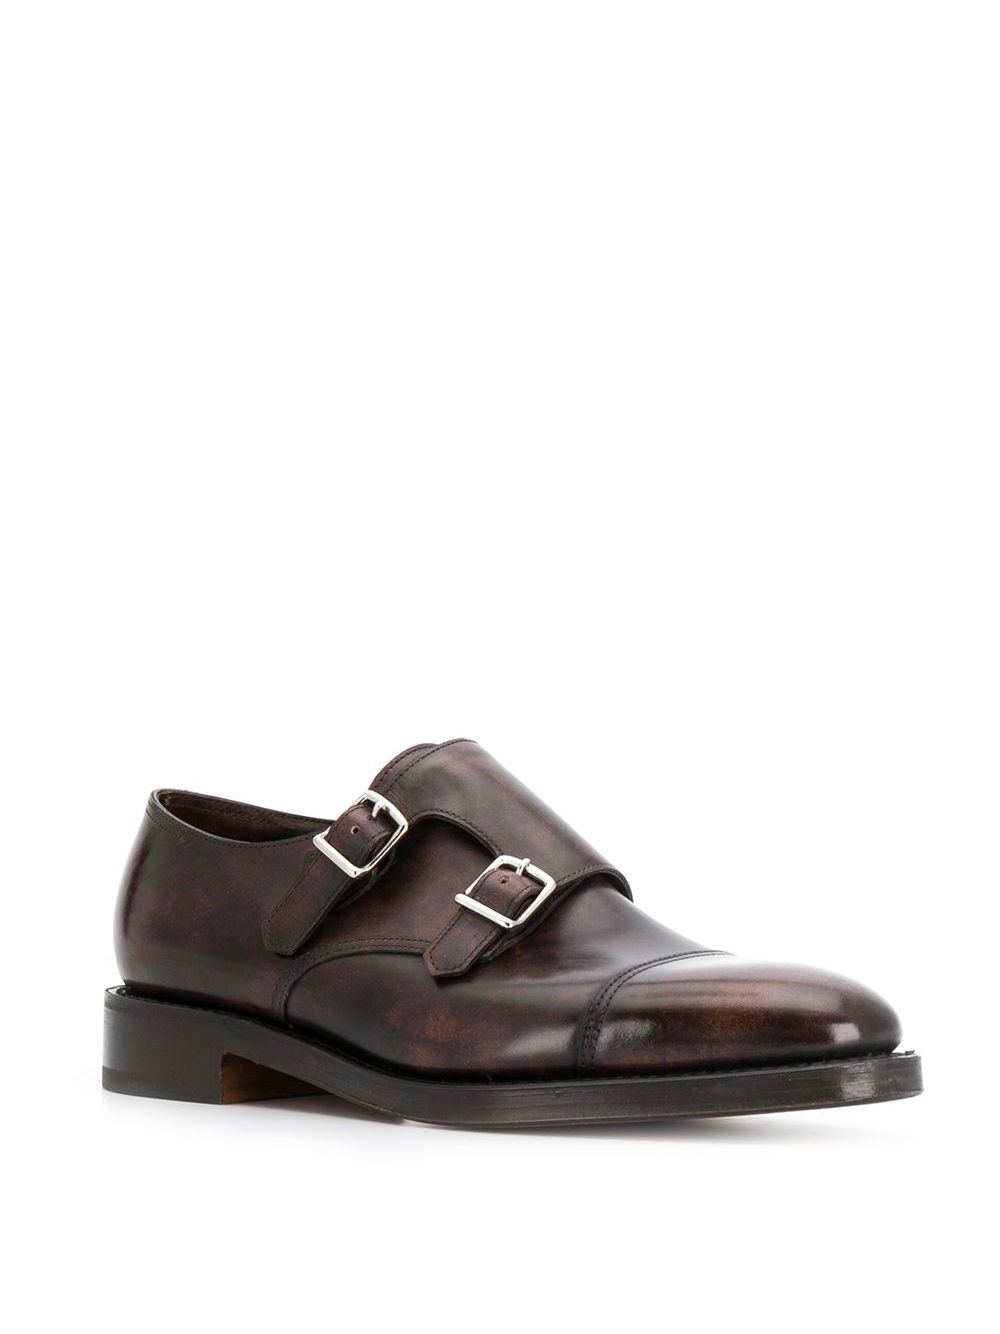 Sophisticated Leather Monk Shoes for Men